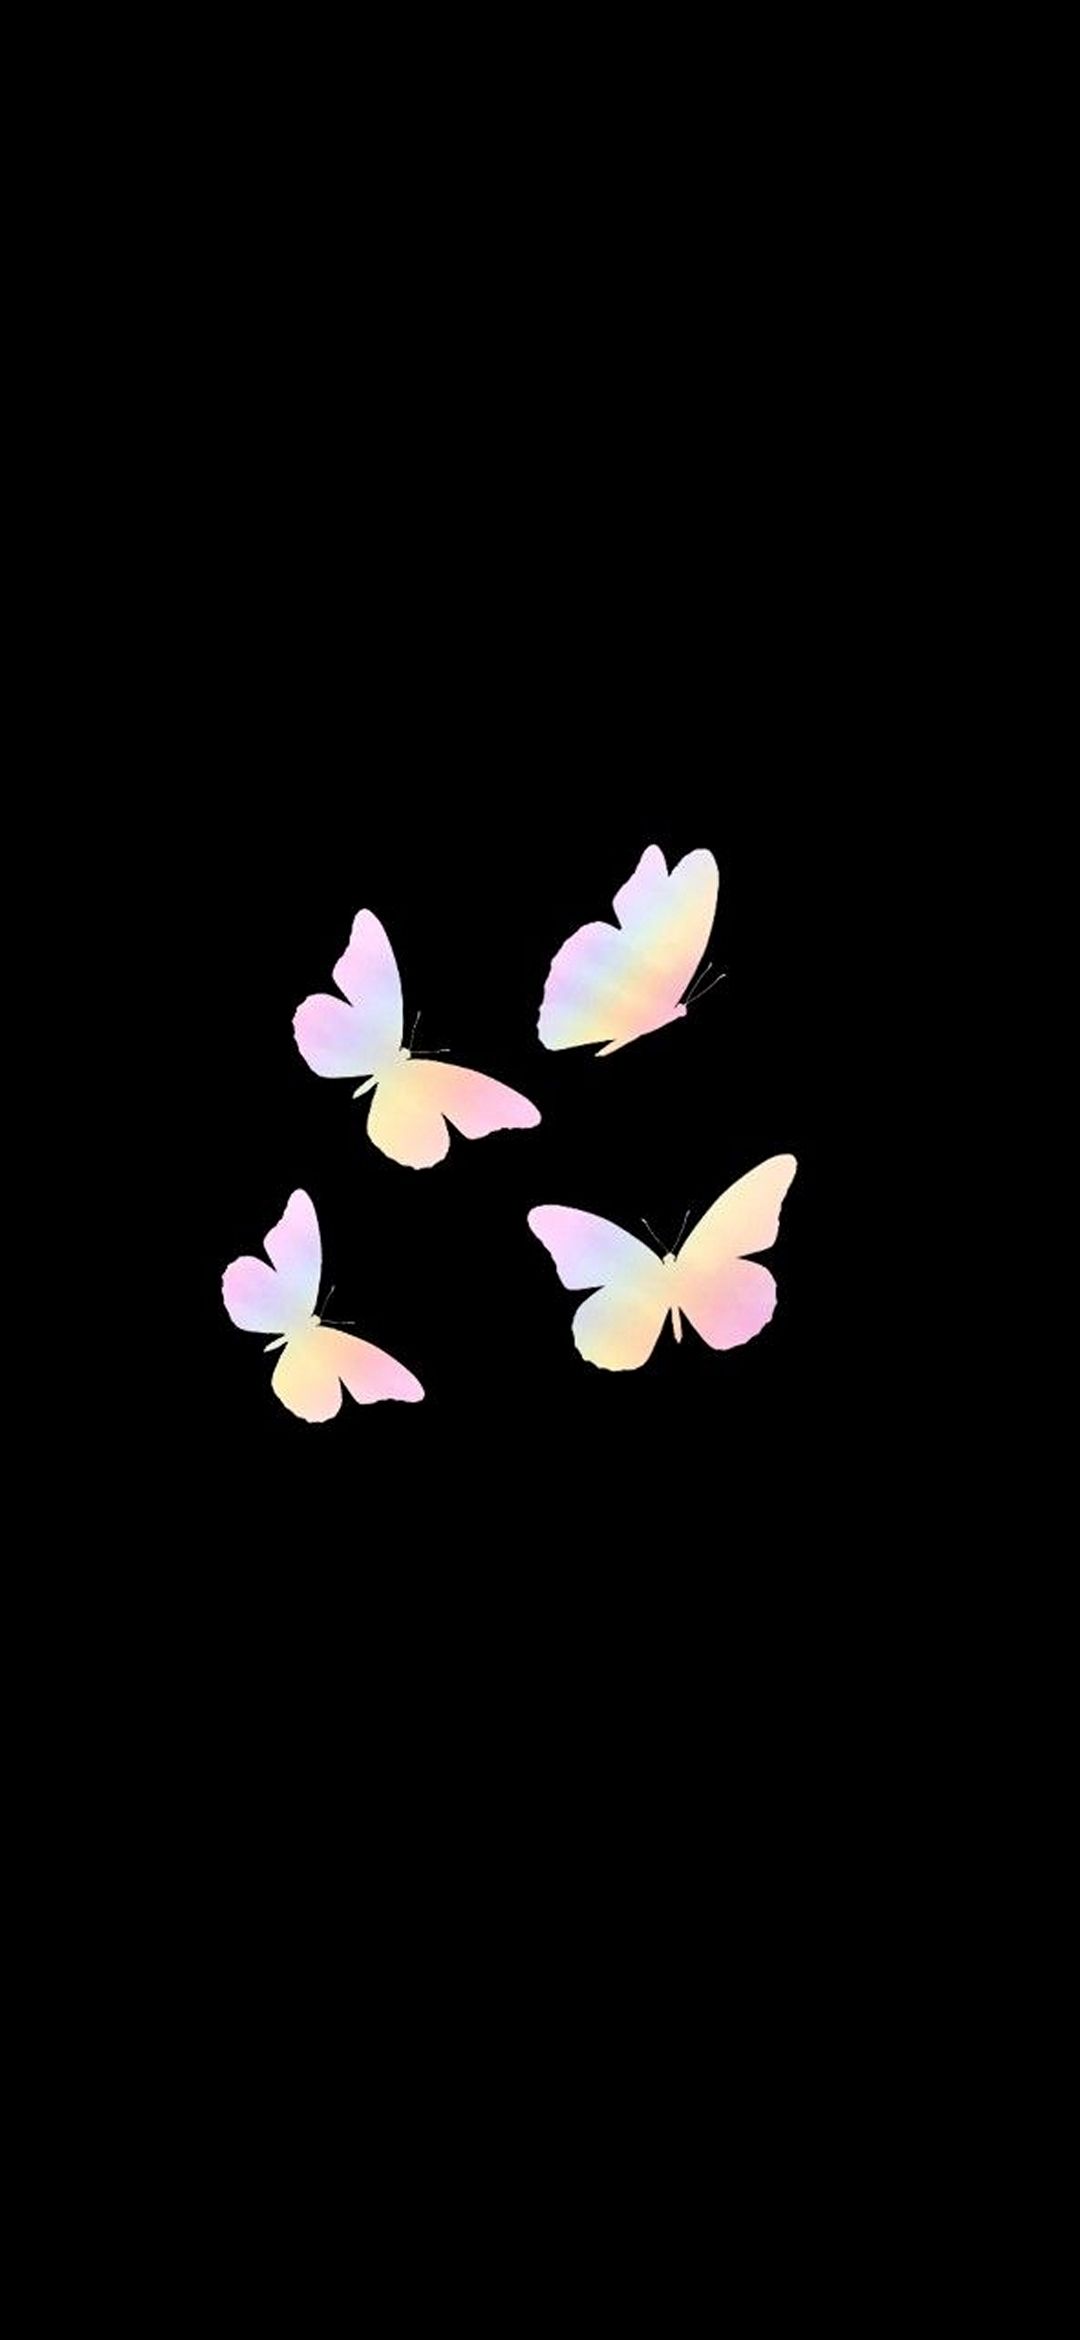 Butterfly Dark Wallpaper for Android Mobile Free Download